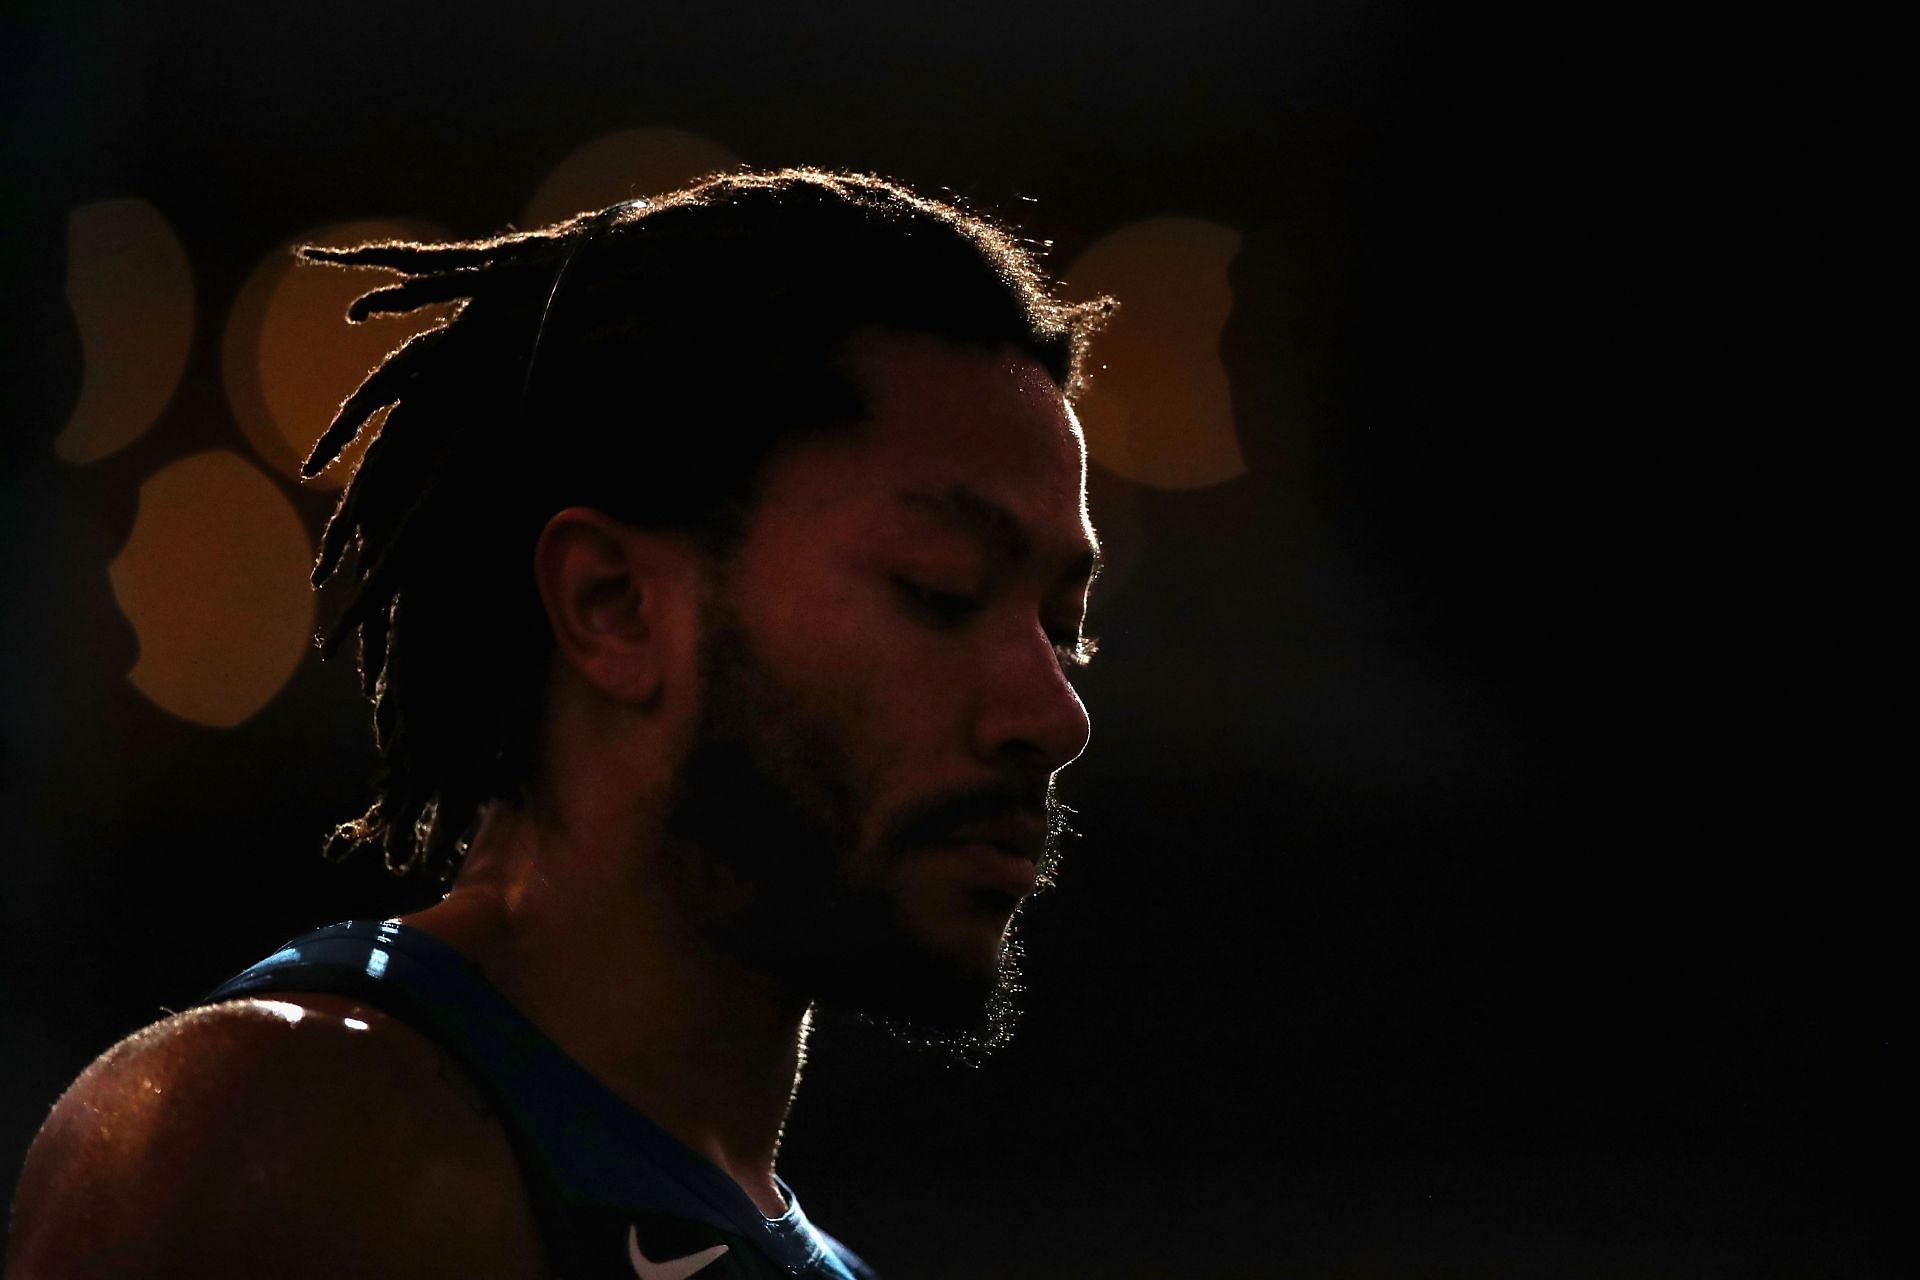 Derrick Rose is still writing his story with a 50-point performance wearing a Timberwolves uniform